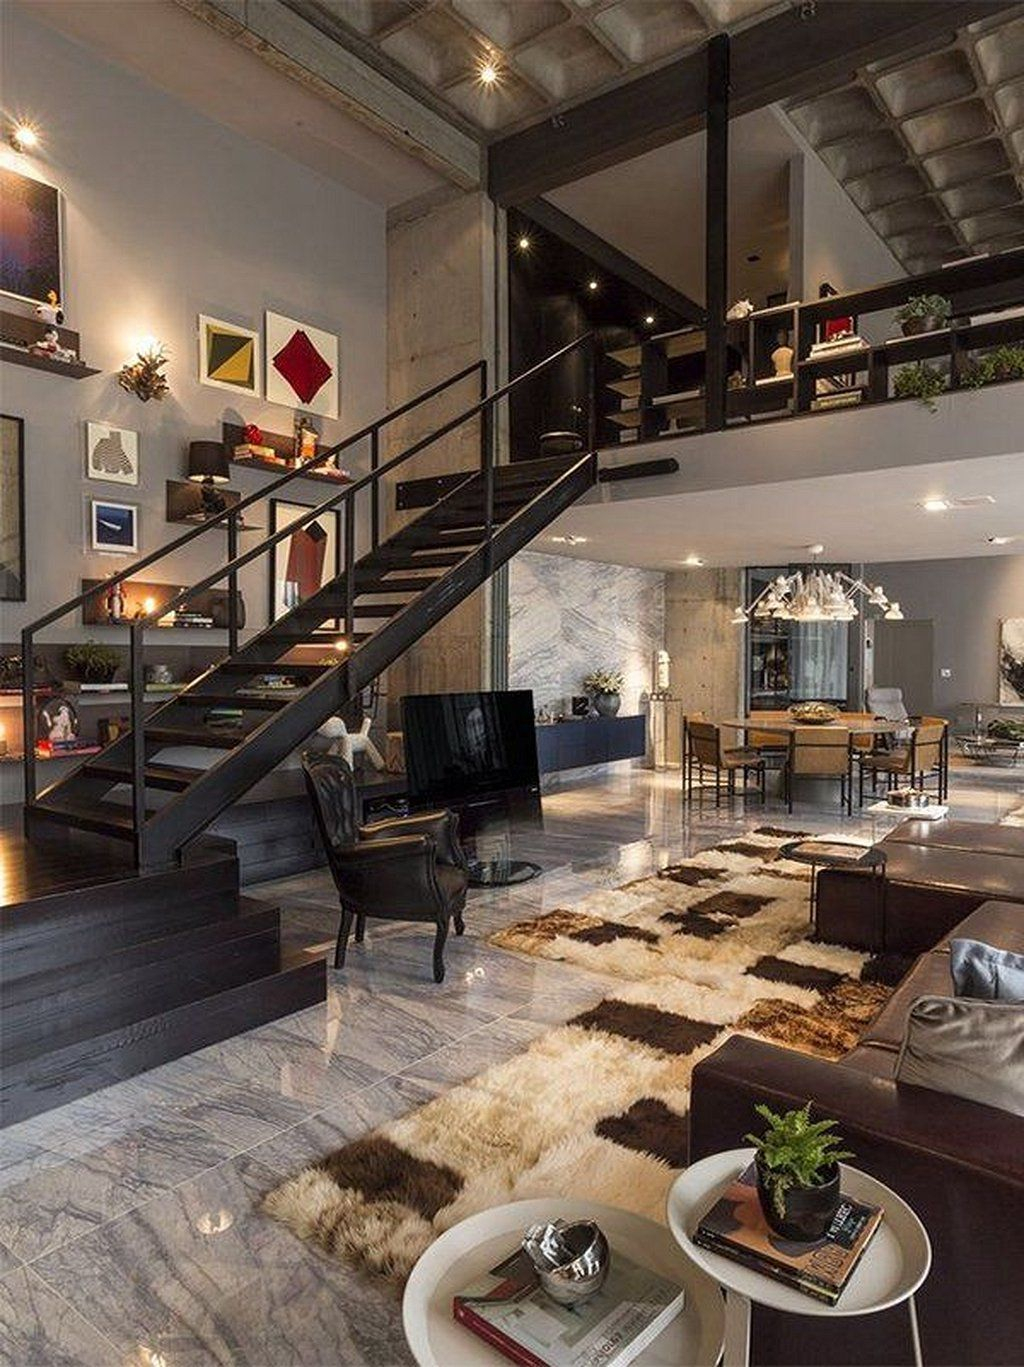 The Best Decorations Industrial Style Living Room That Will Amaze Your Guests03